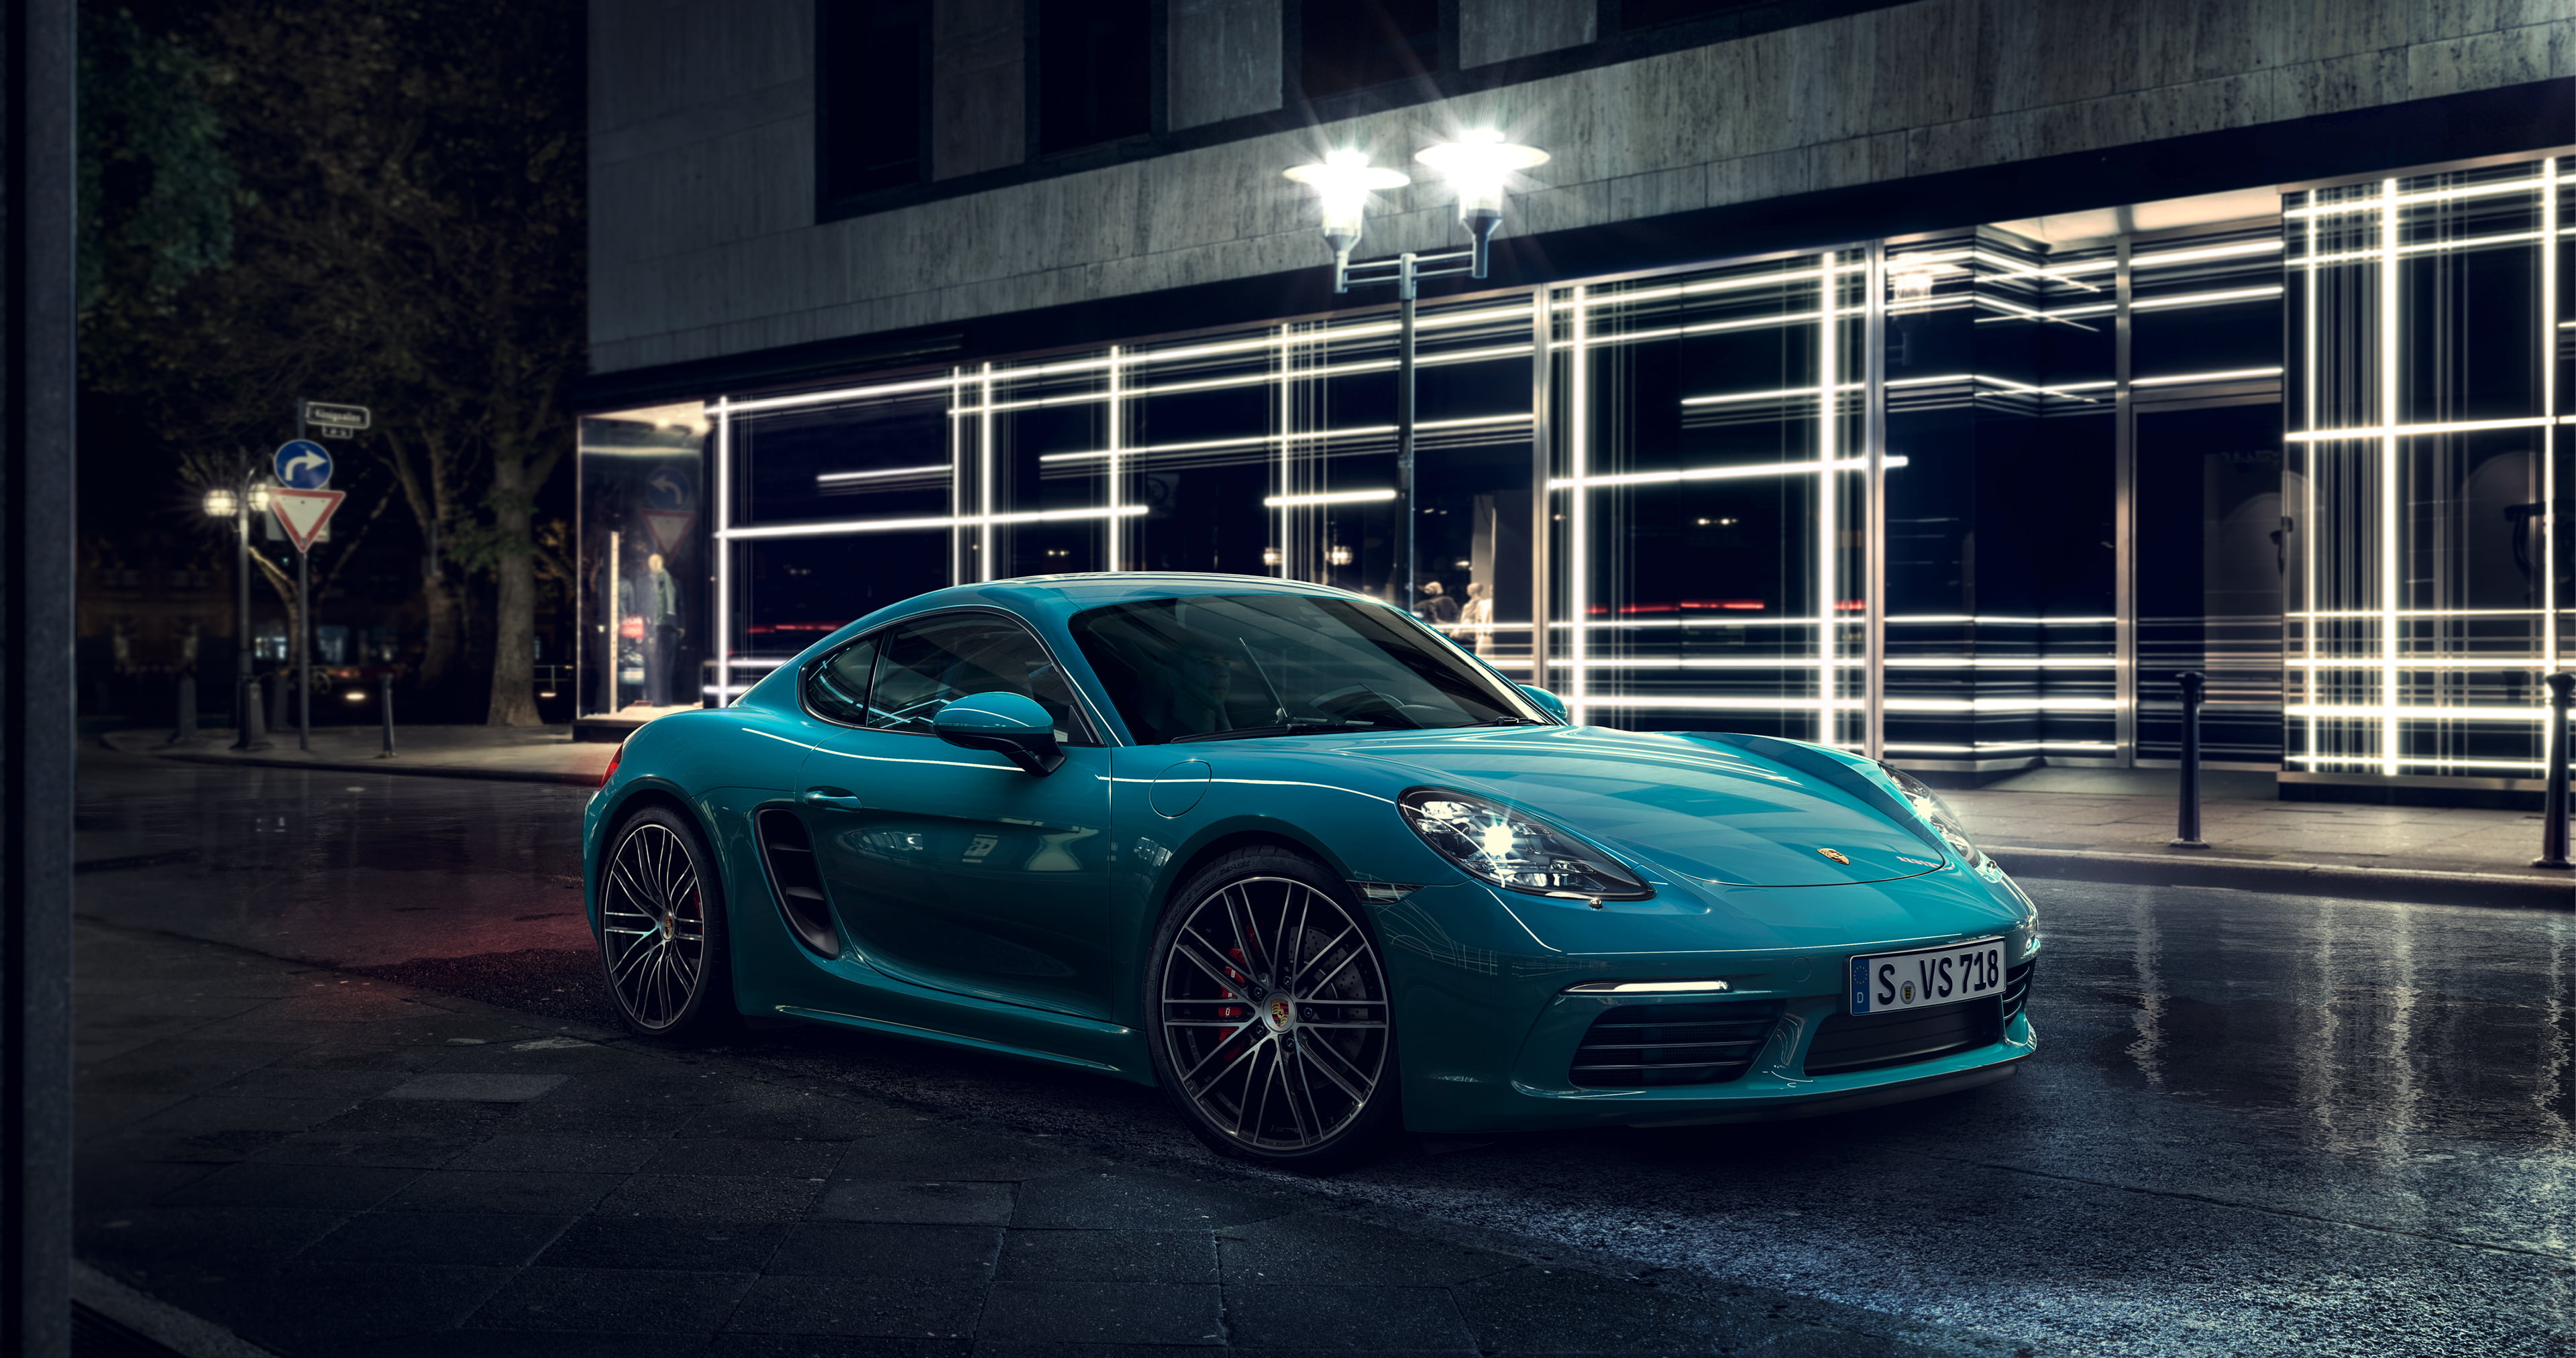 blue Porsche Cayman S on street during night time